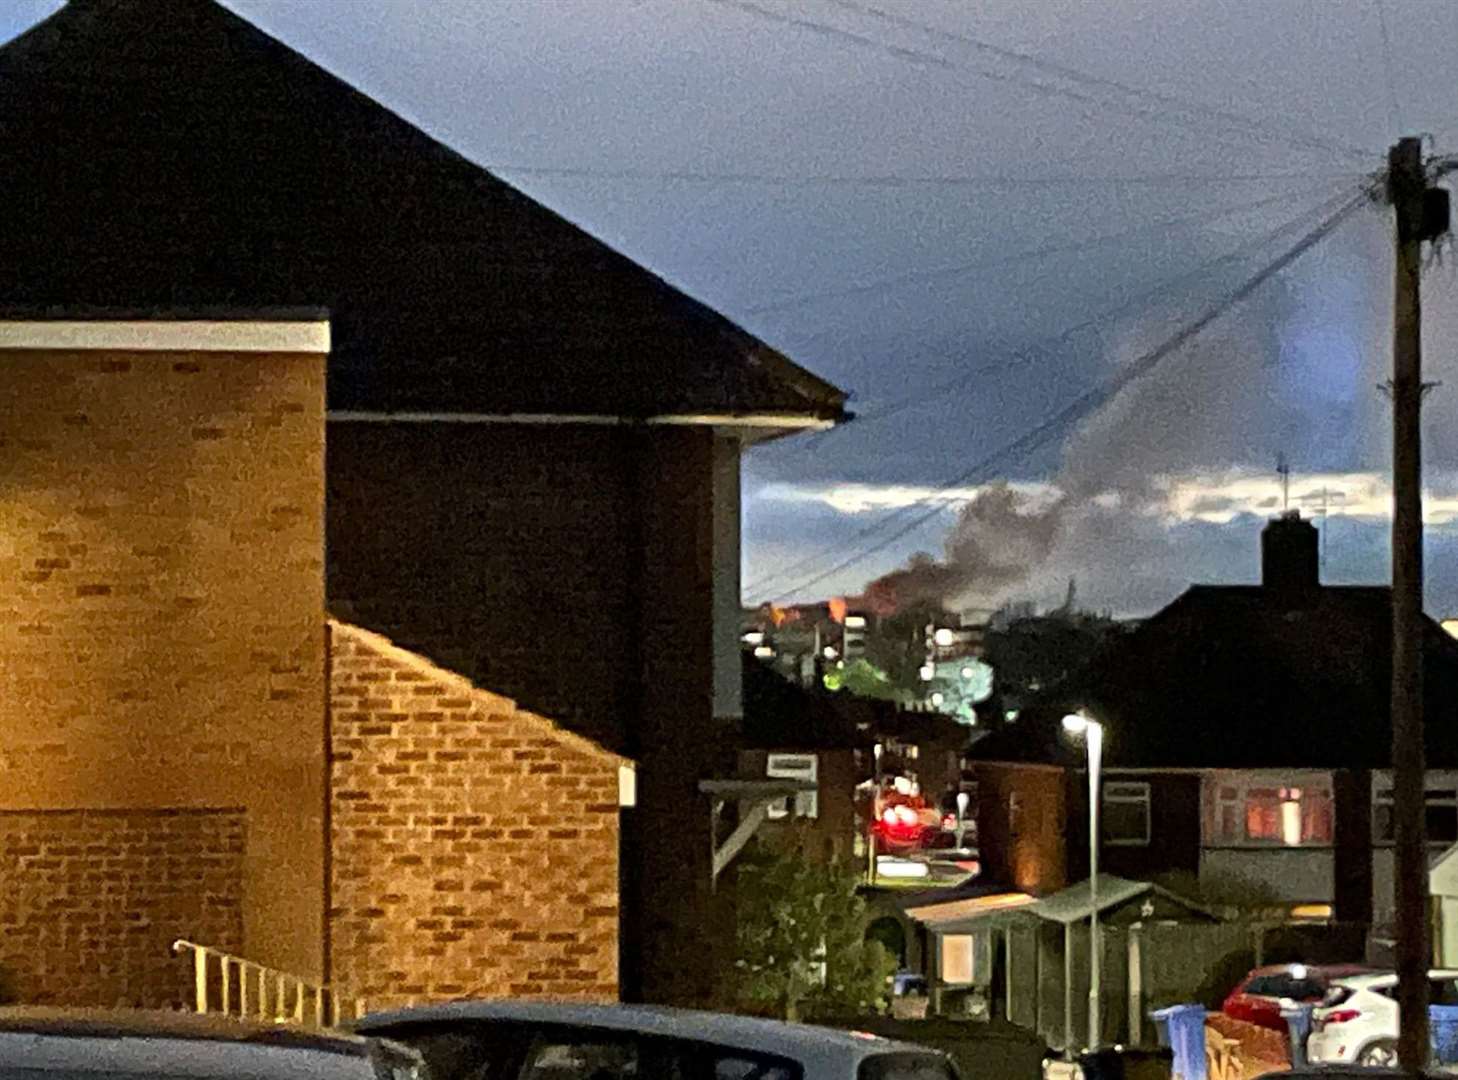 Plumes of smoke could be seen in Sittingbourne